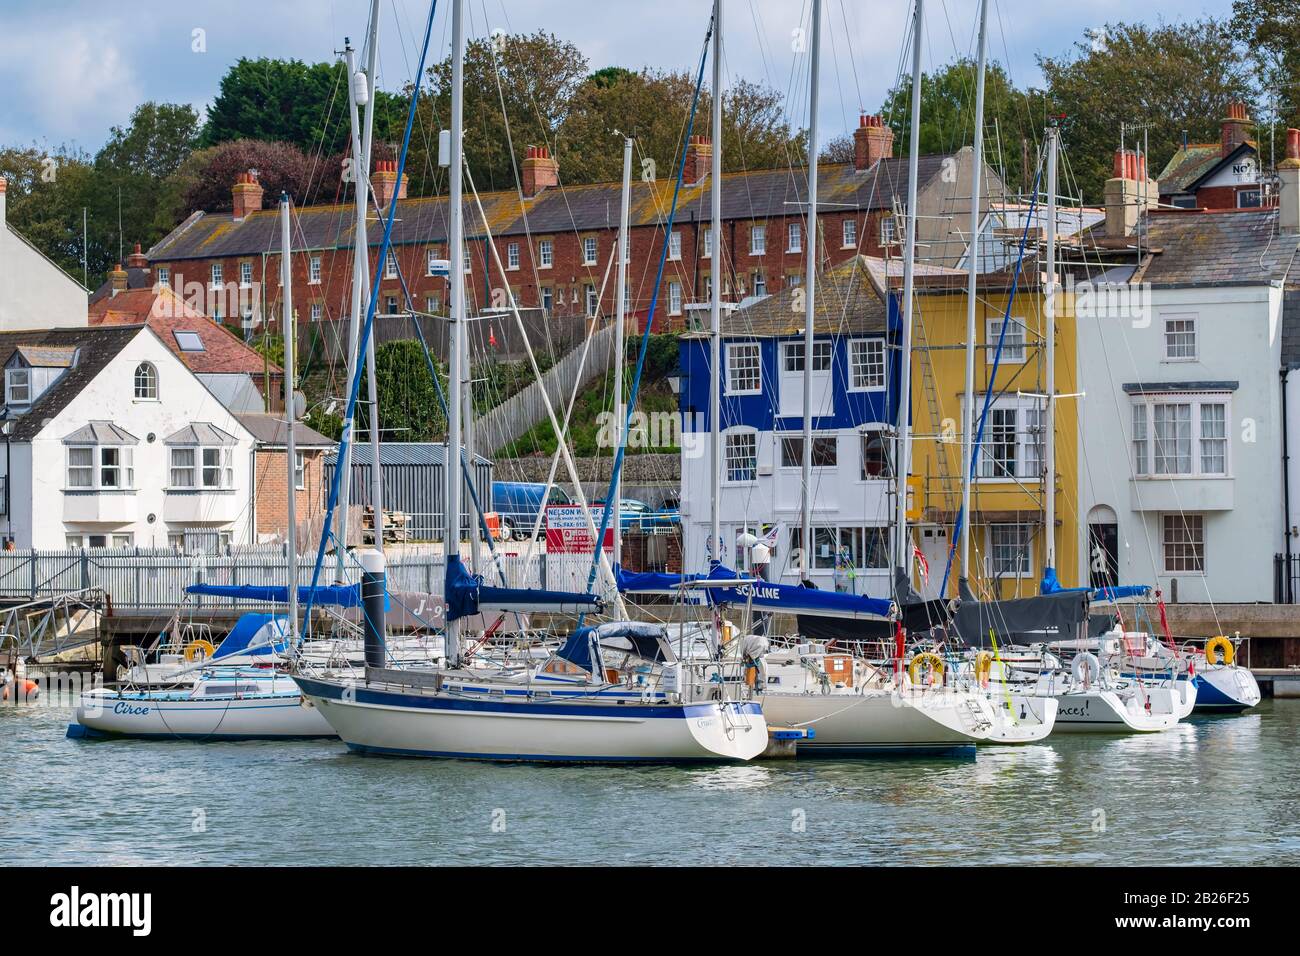 Moored yachts and boats in Weymouth Harbour with colourful houses on the Jurassic Coastline of Dorset, South West, UK Stock Photo